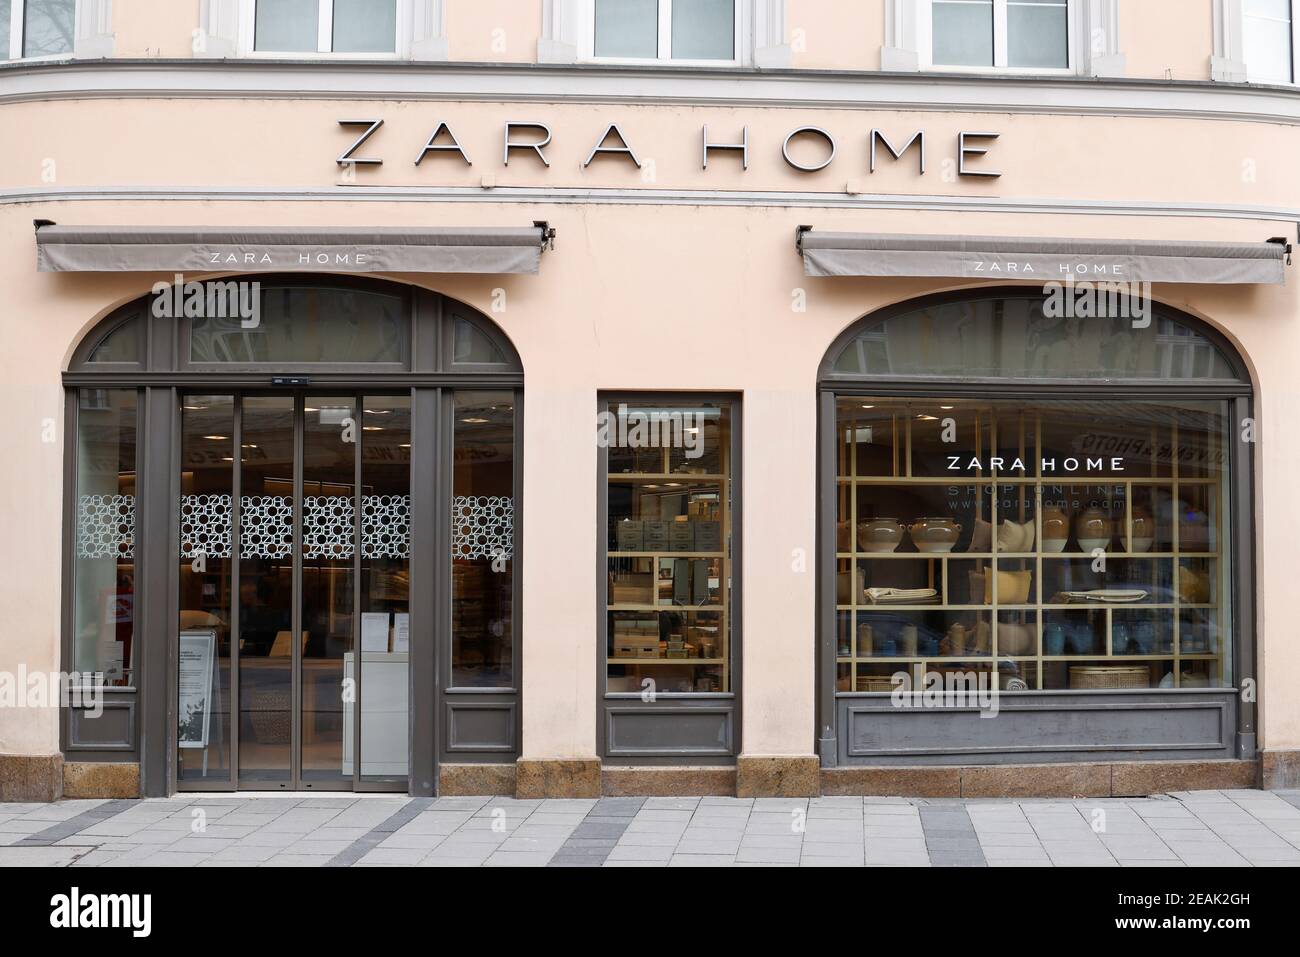 Zara Munich High Resolution Stock Photography and Images - Alamy